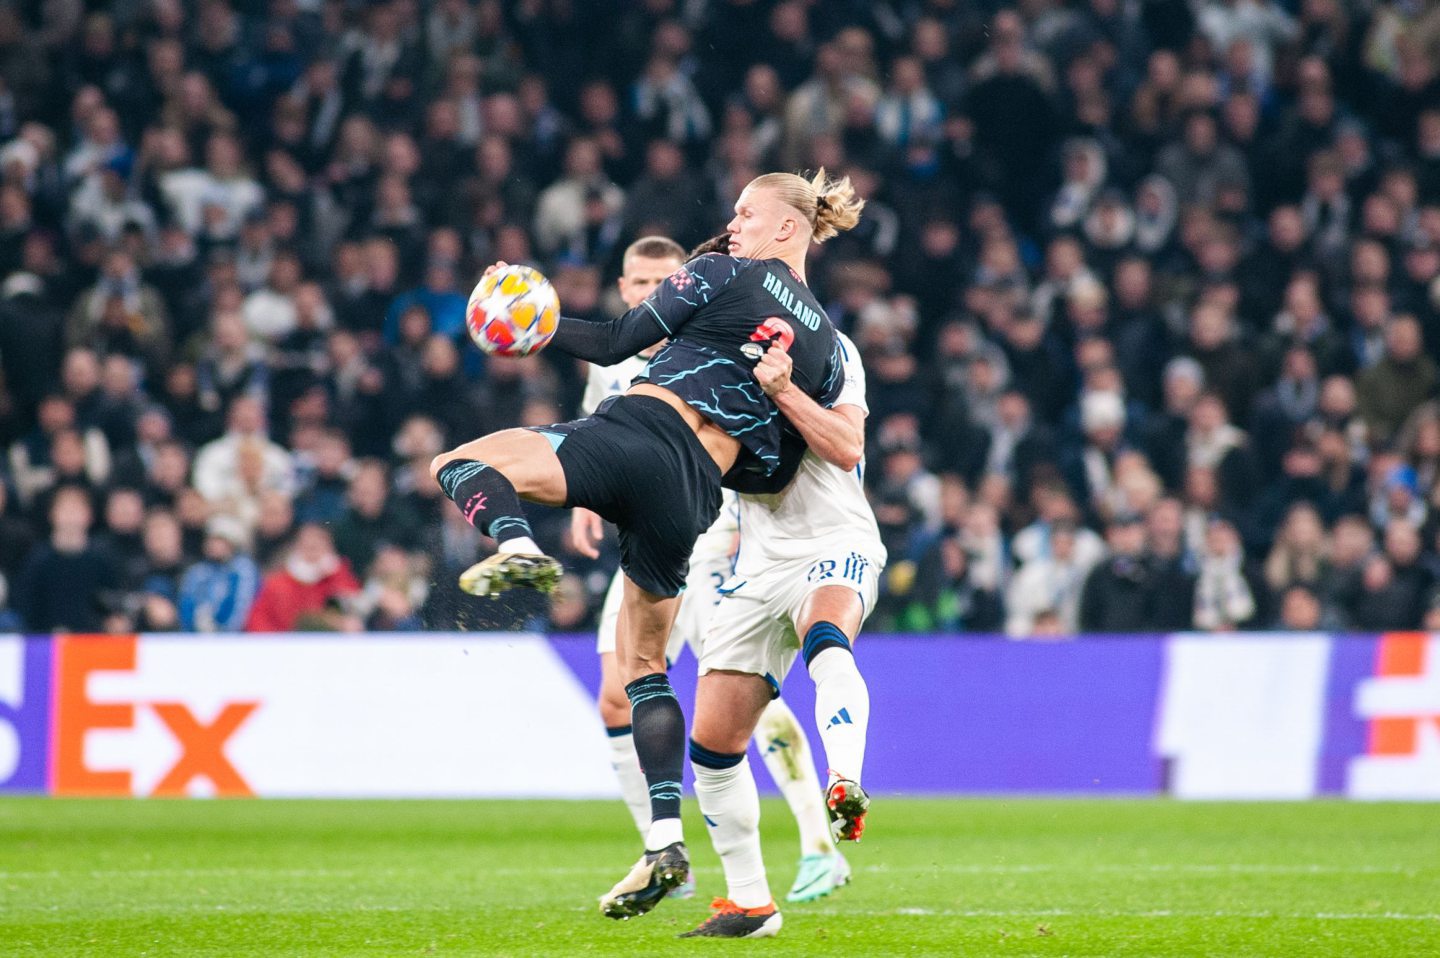 Erling Haaland of Manchester City battling for possession with Scott McKenna of FC Copenhagen during the UEFA Champions League round of 16 first leg. Image: Shutterstock 